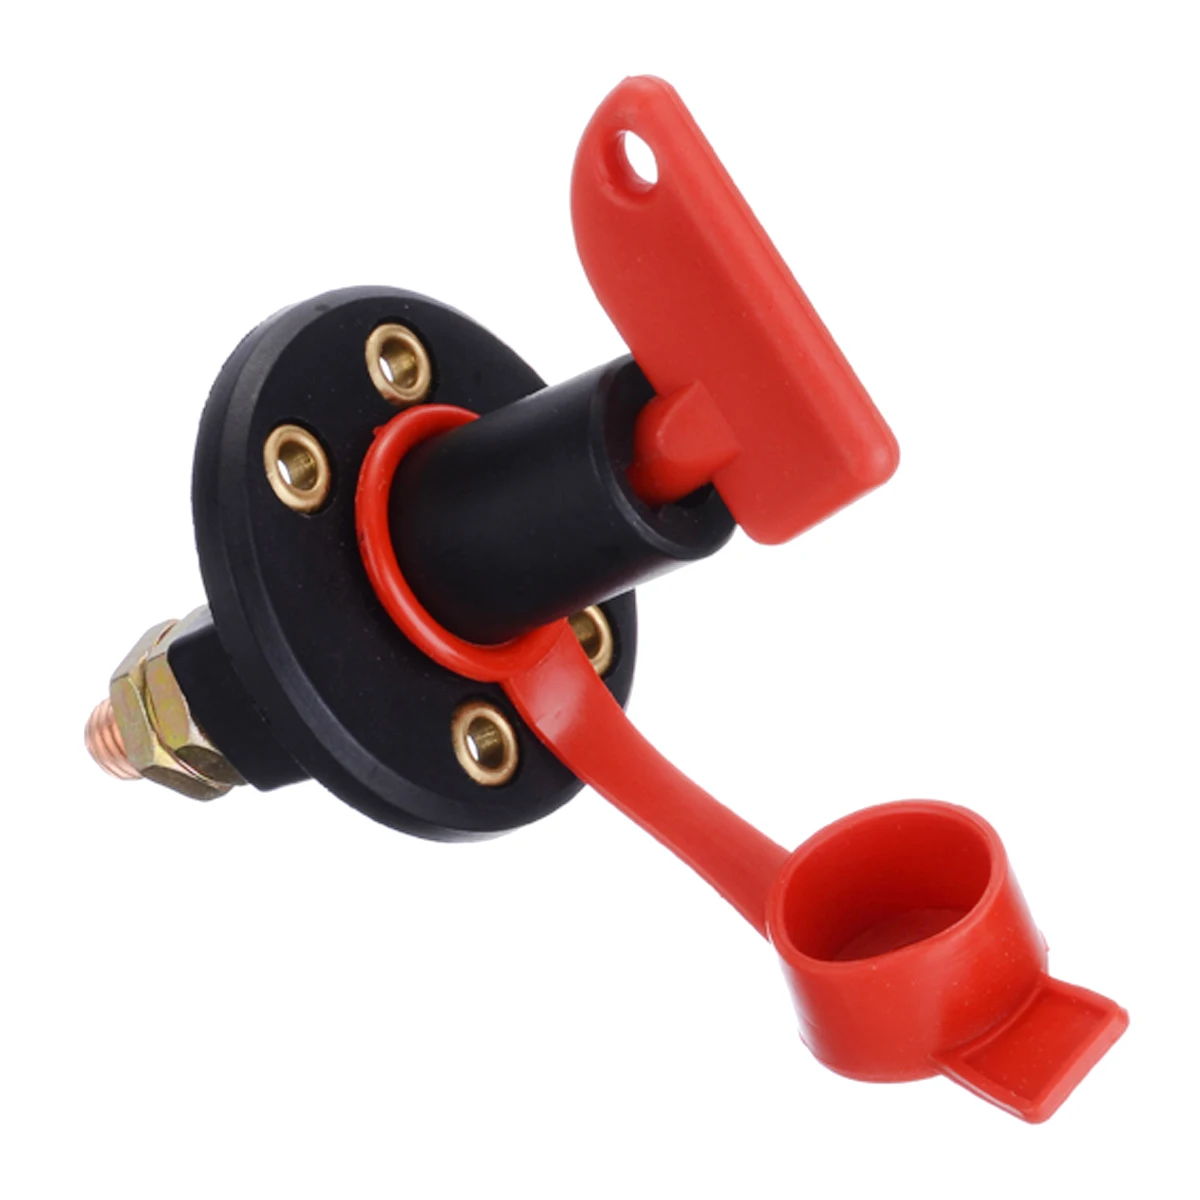 Car Truck Boat Battery Disconnect Switch Power Isolator Cut Off Kill Switch +2 Removable Keys 12V 300A Auto Refitting Switch